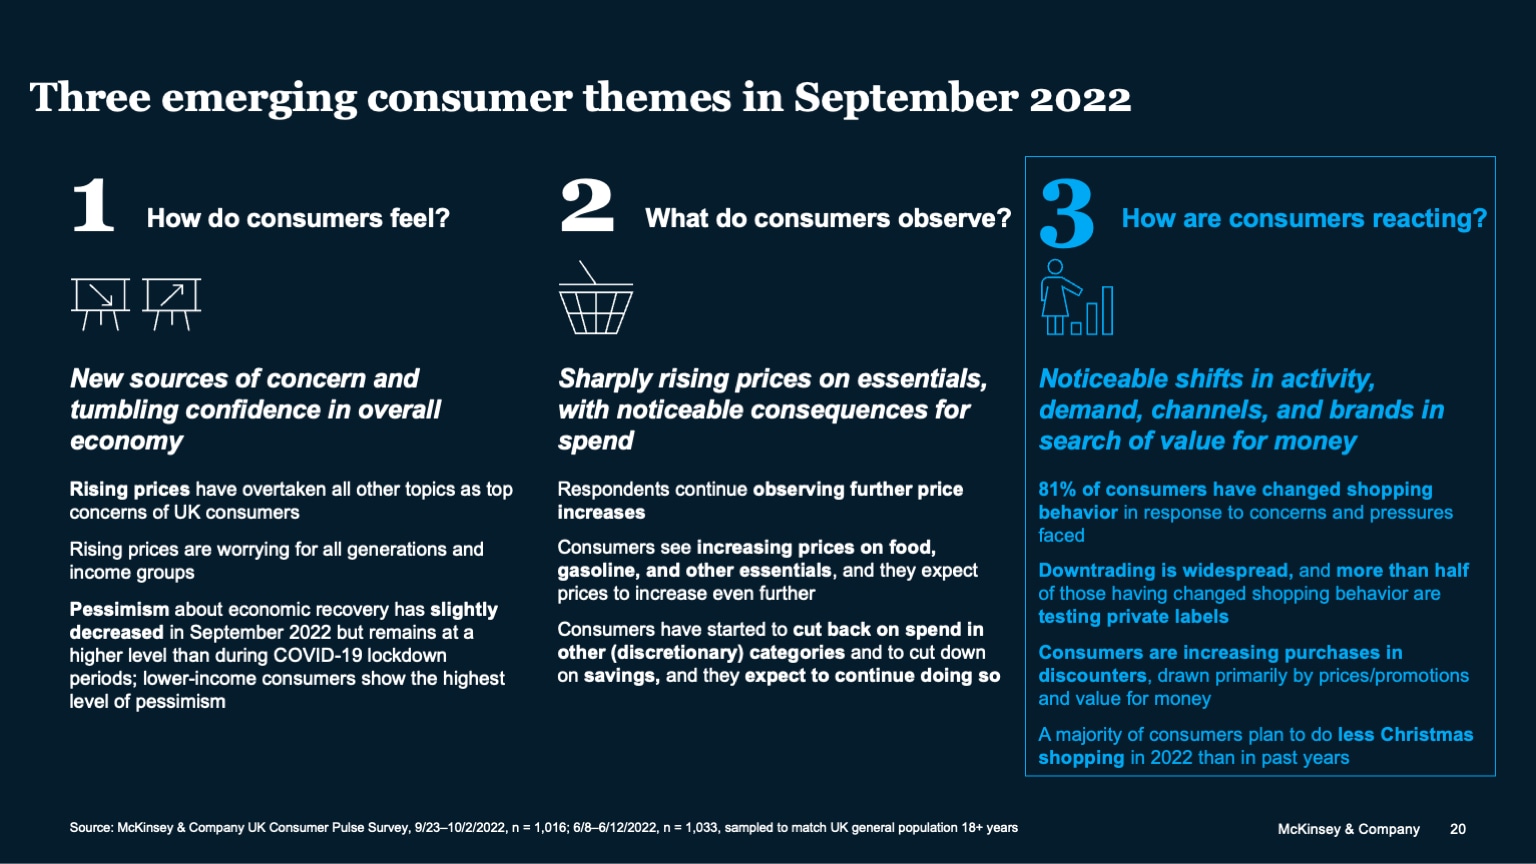 Three emerging consumer themes in September 2022